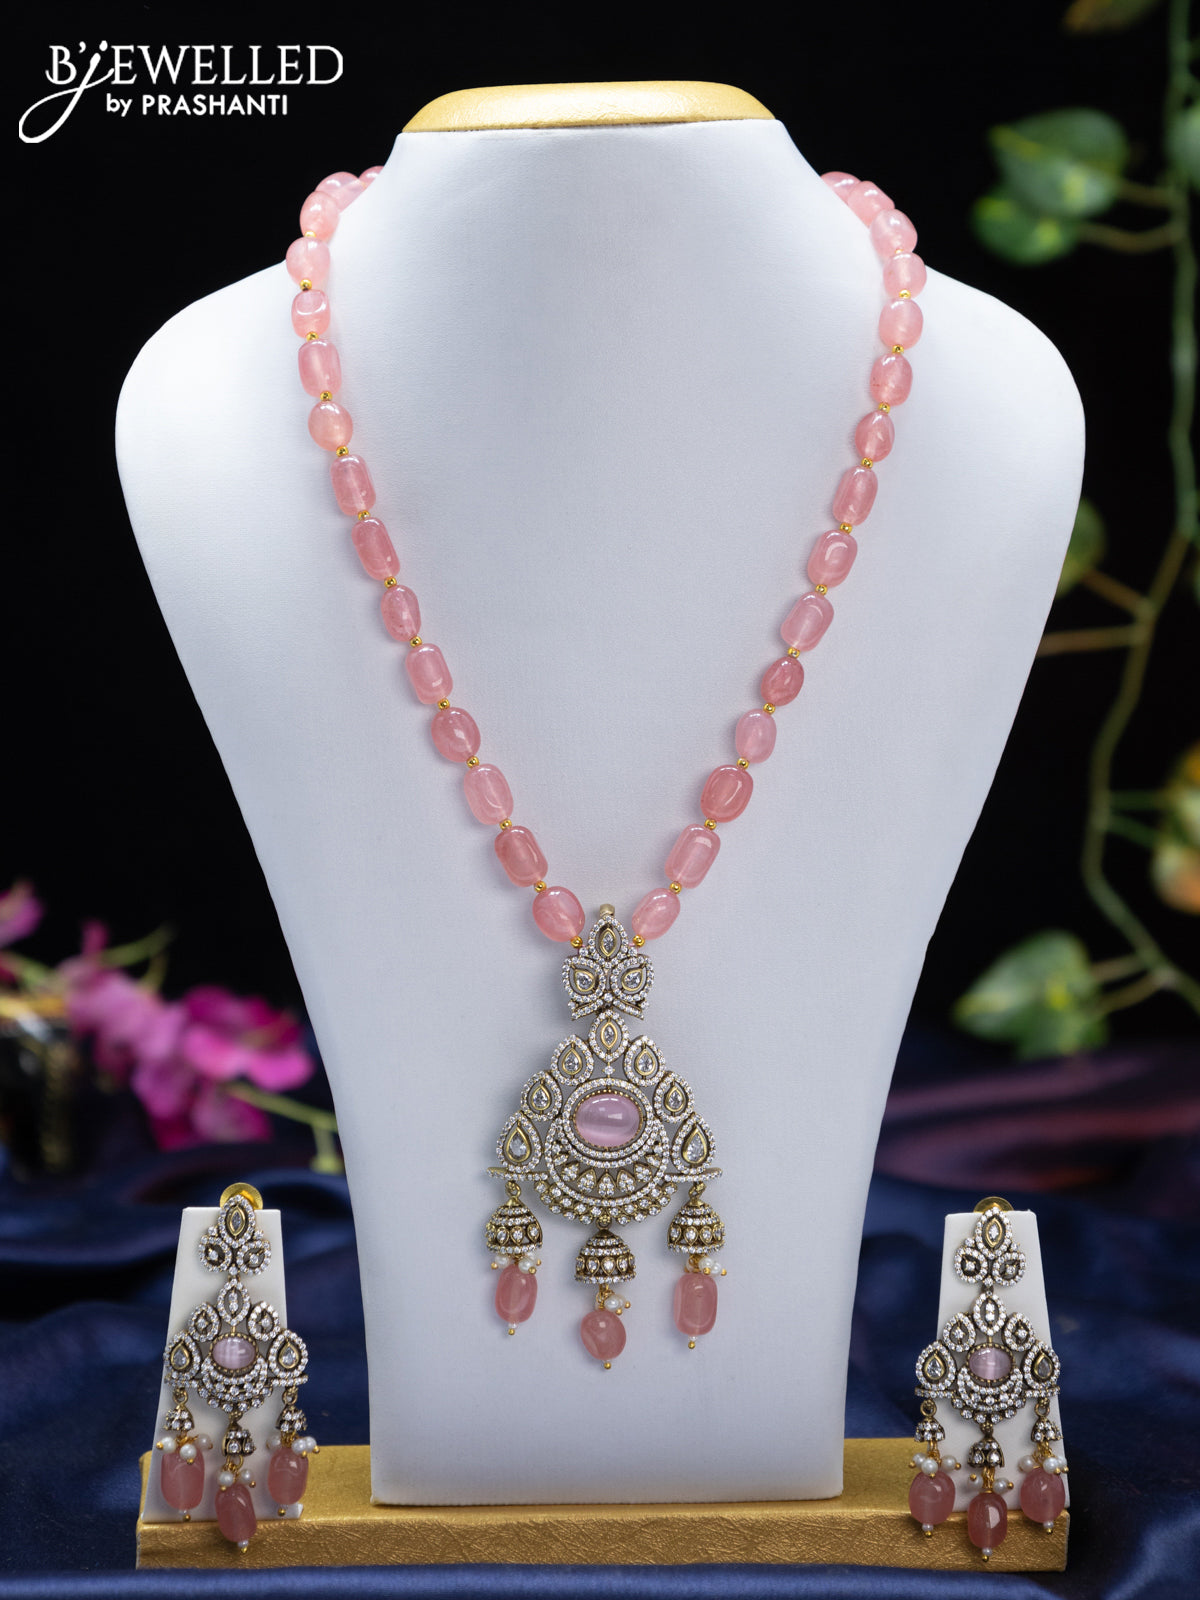 Beaded light pink necklace with baby pink & cz stones and beads hangings in victorian finish